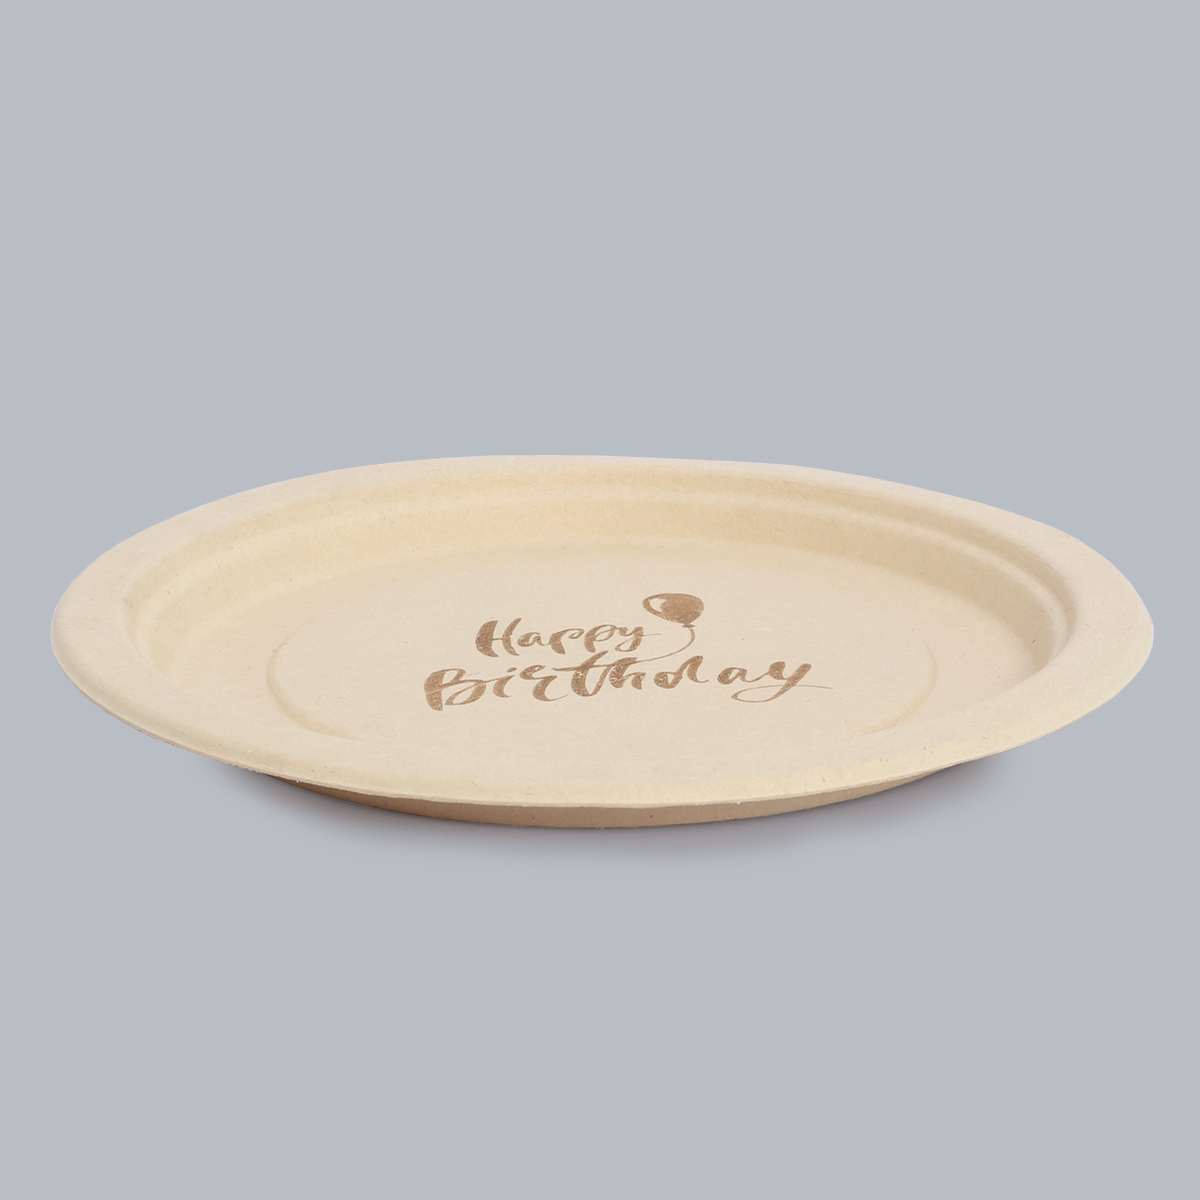 Green Paper Products Disposable Tableware 9-inch Round Plate Disposable Eco-Friendly Plates